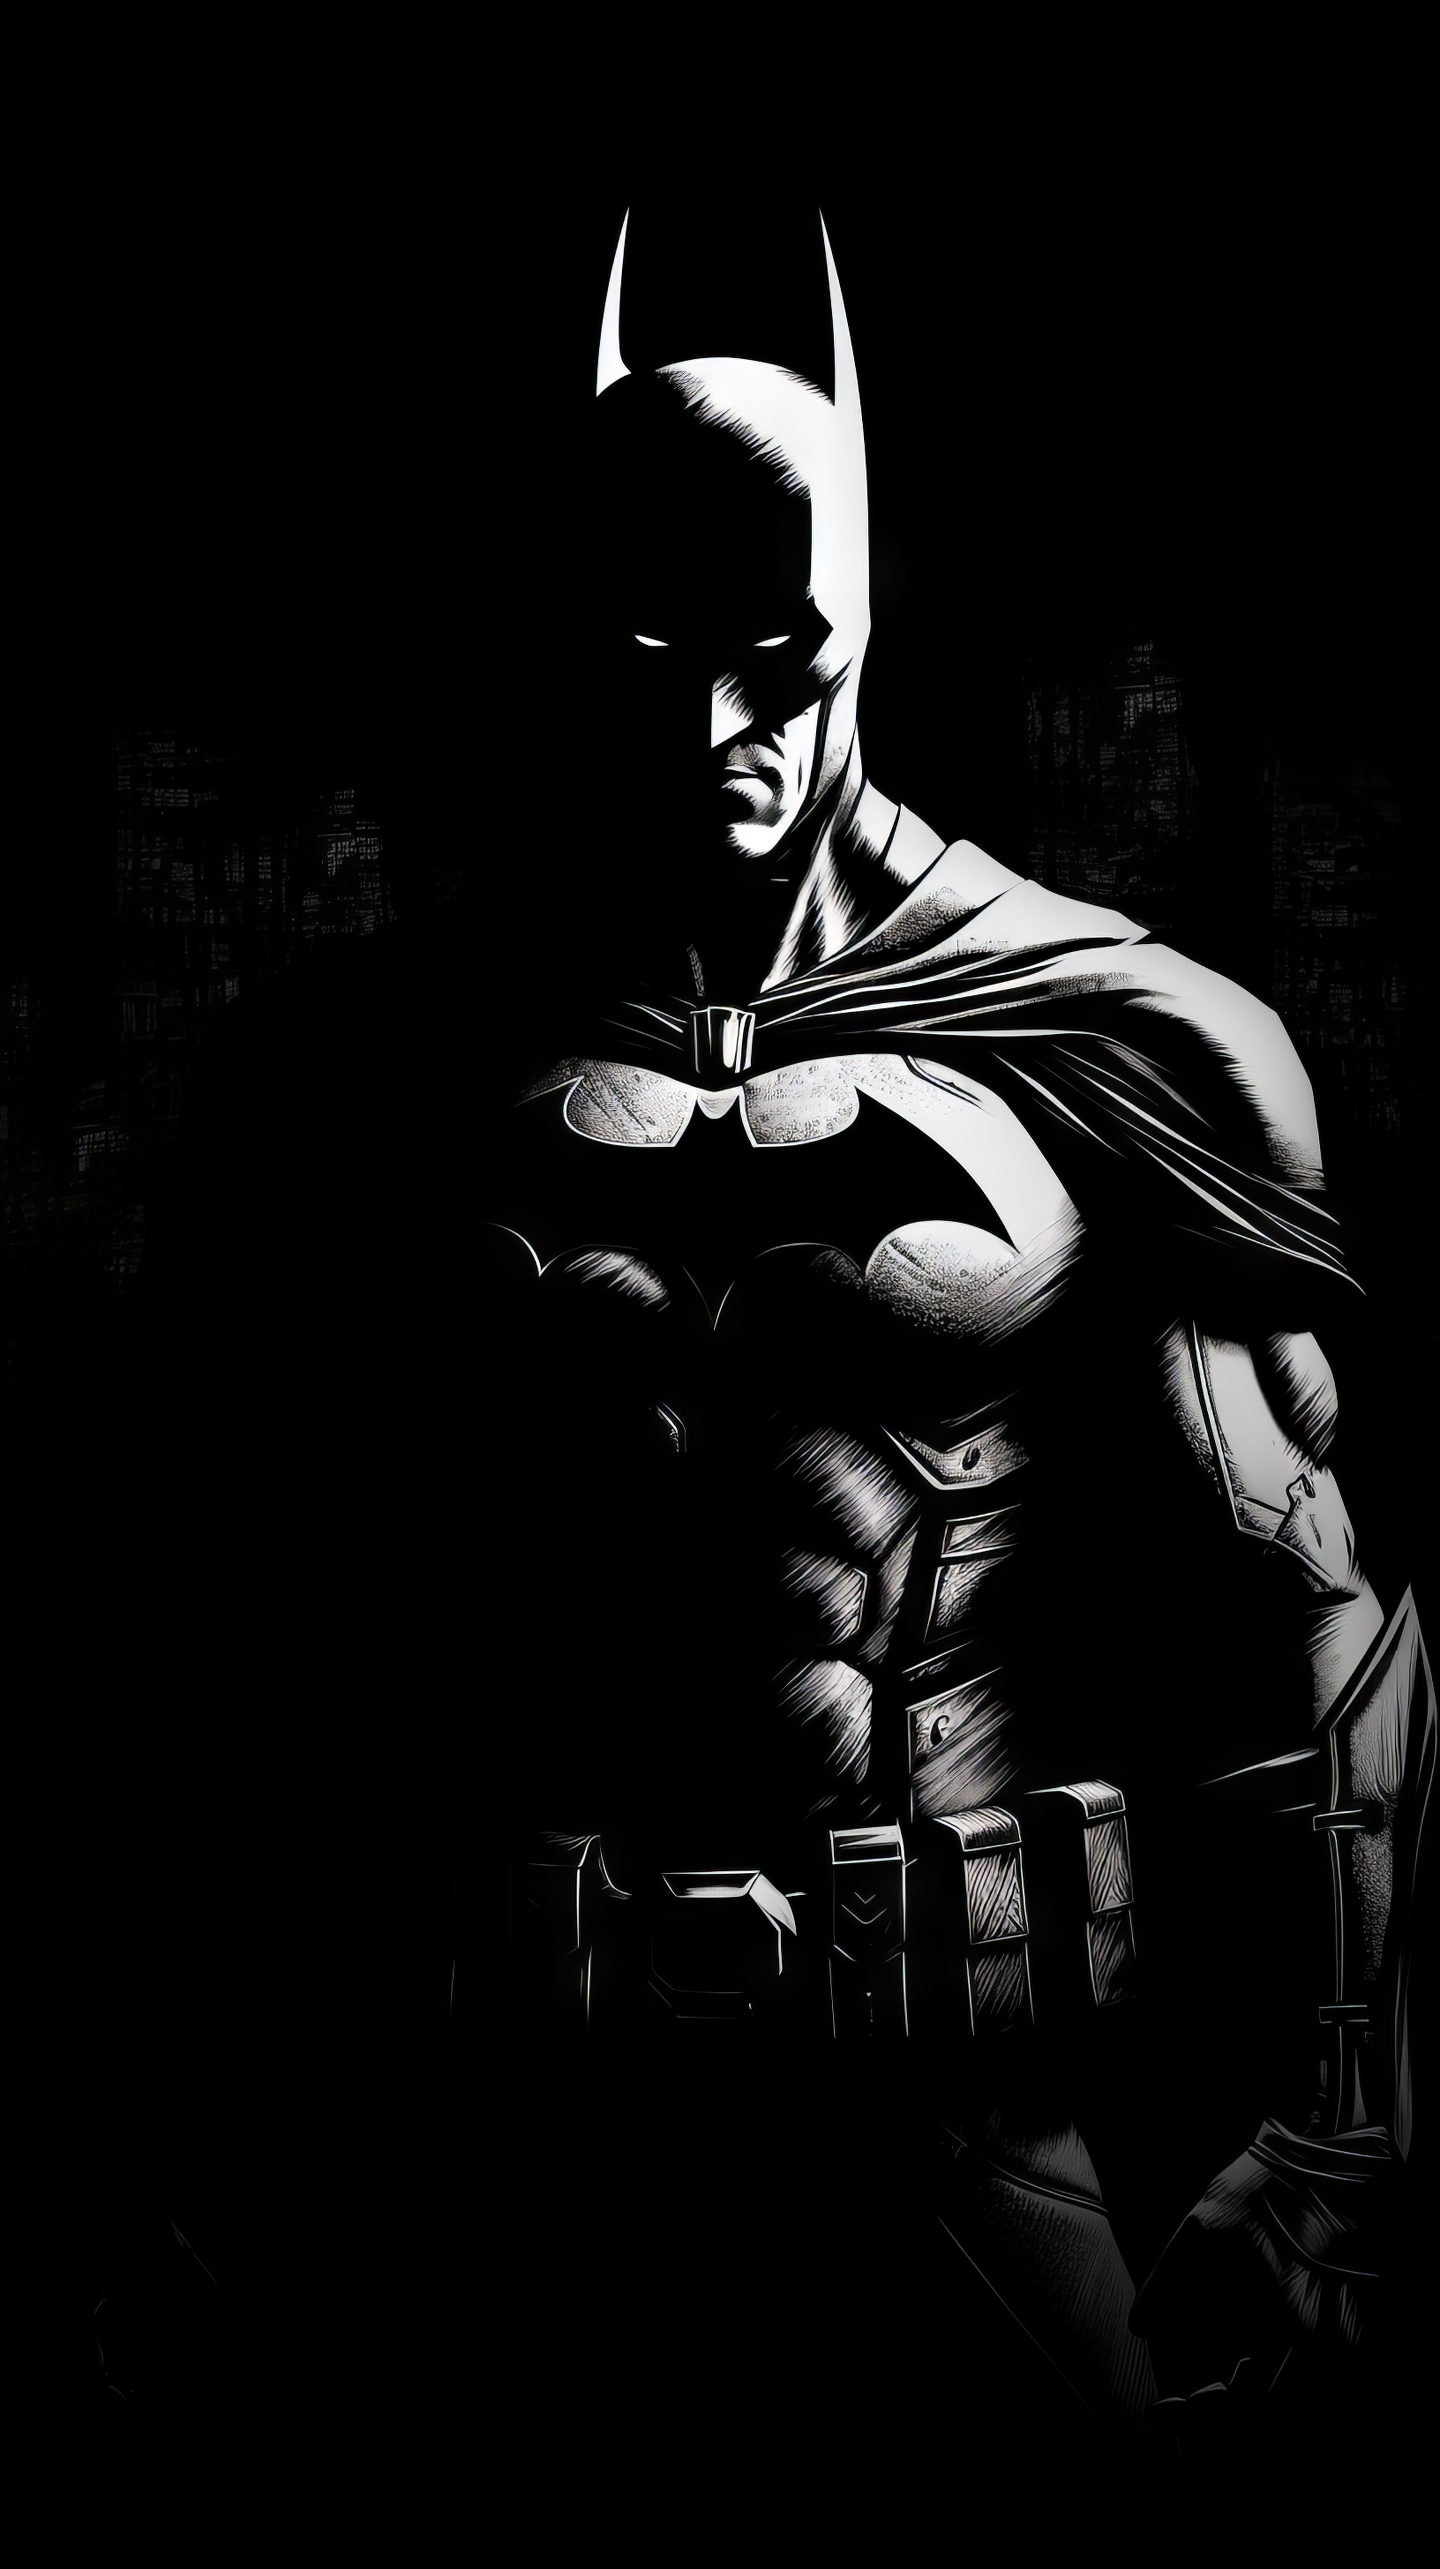 Dark and moody Batman phone wallpaper in black and white, featuring the iconic superhero in a dramatic pose, perfect for The Batman fans.